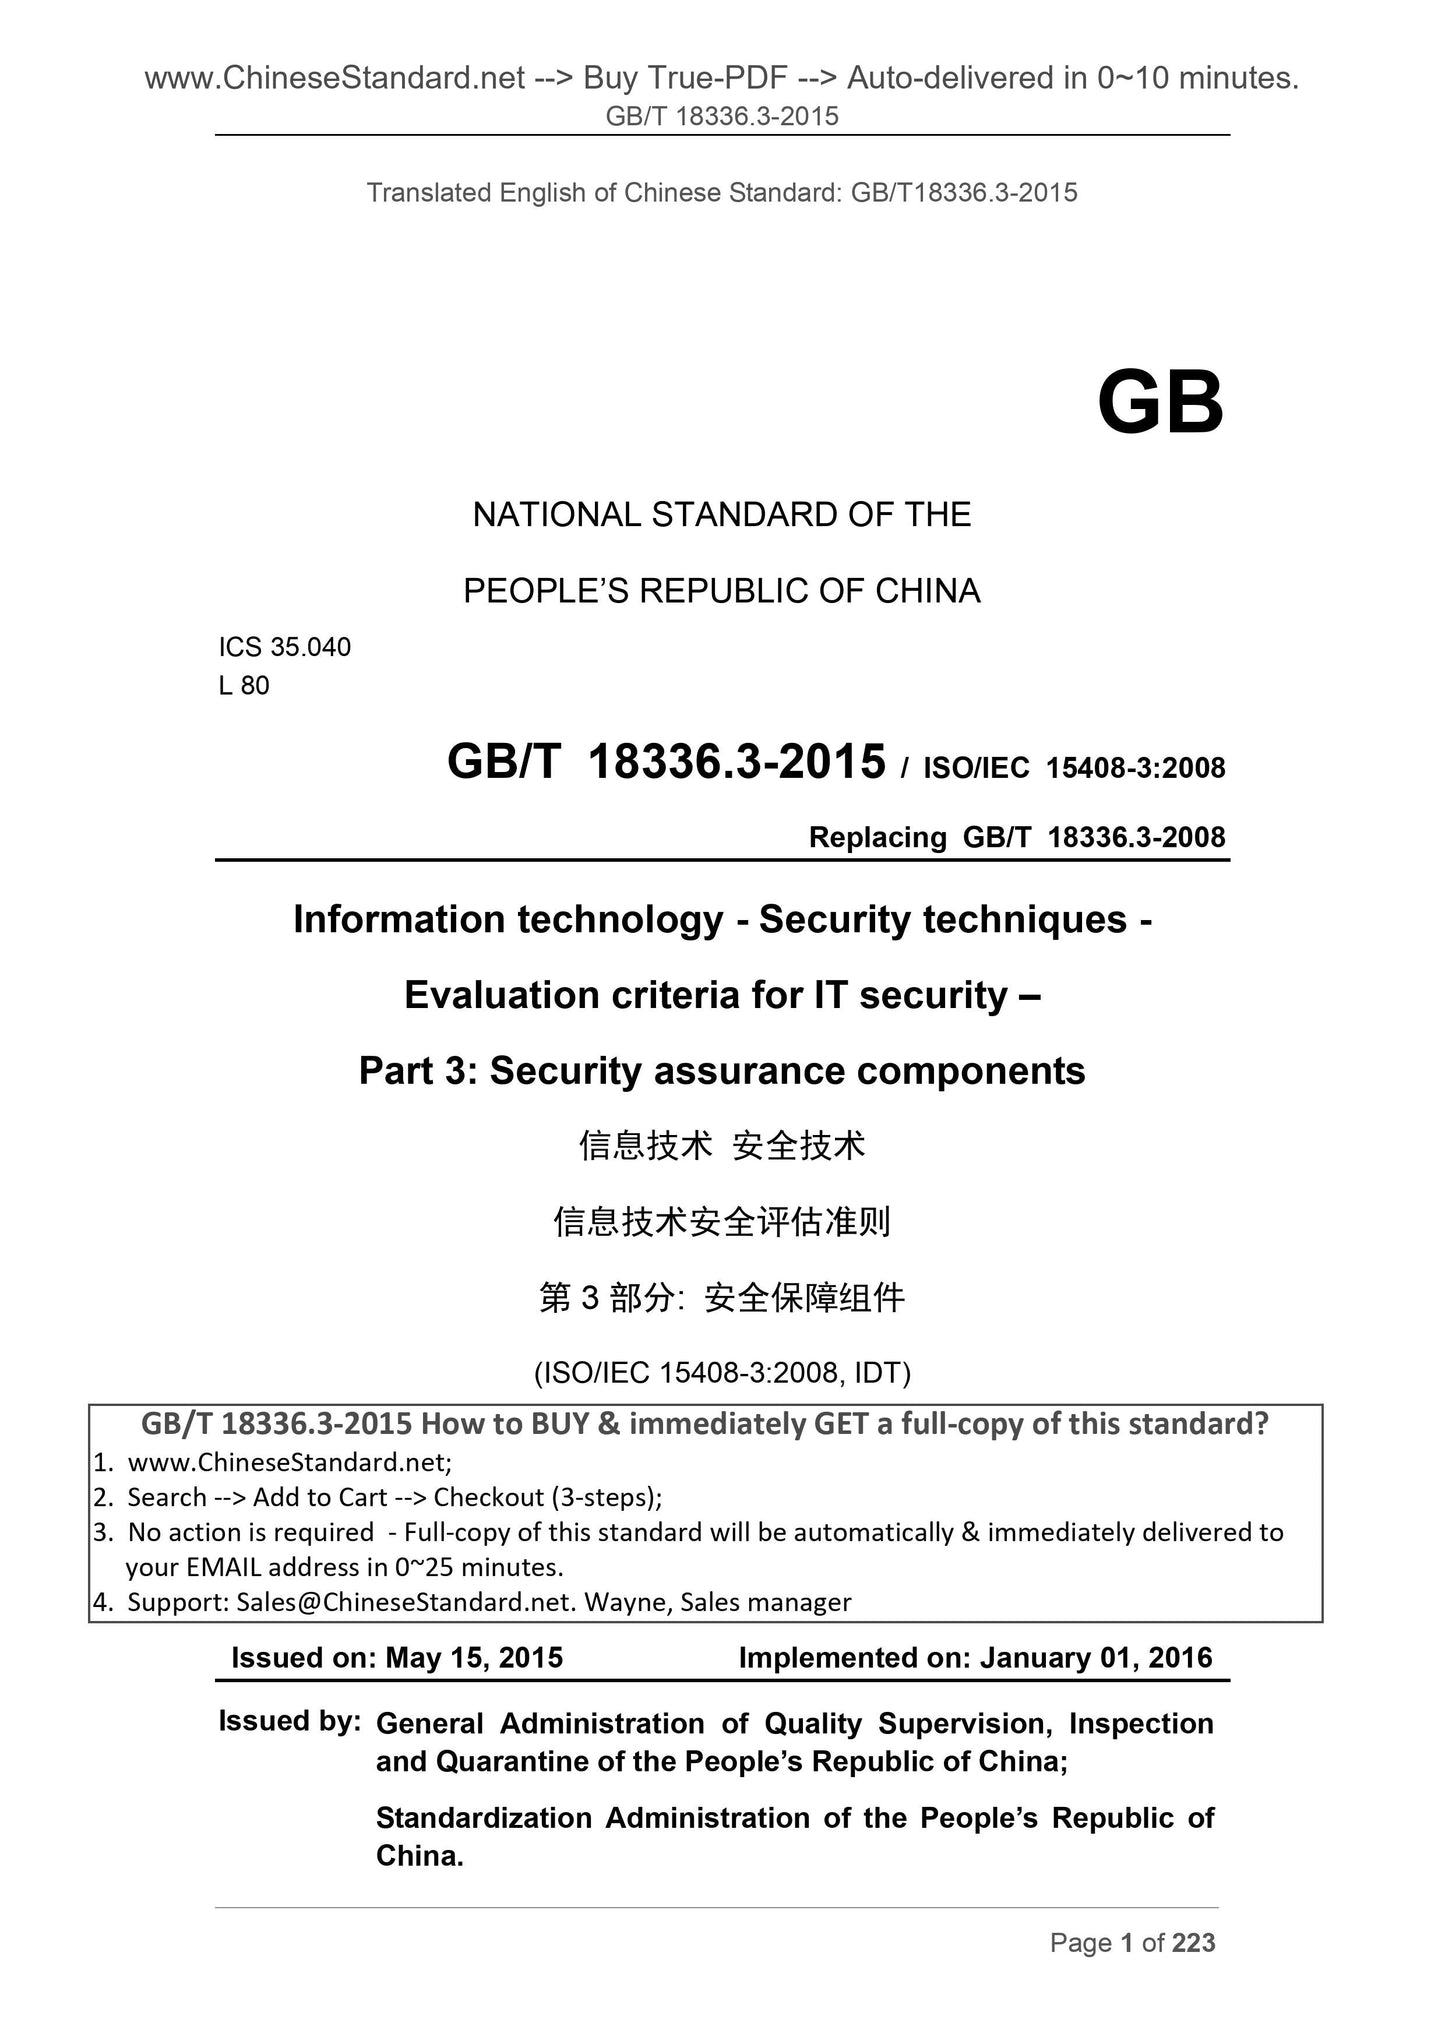 GB/T 18336.3-2015 Page 1